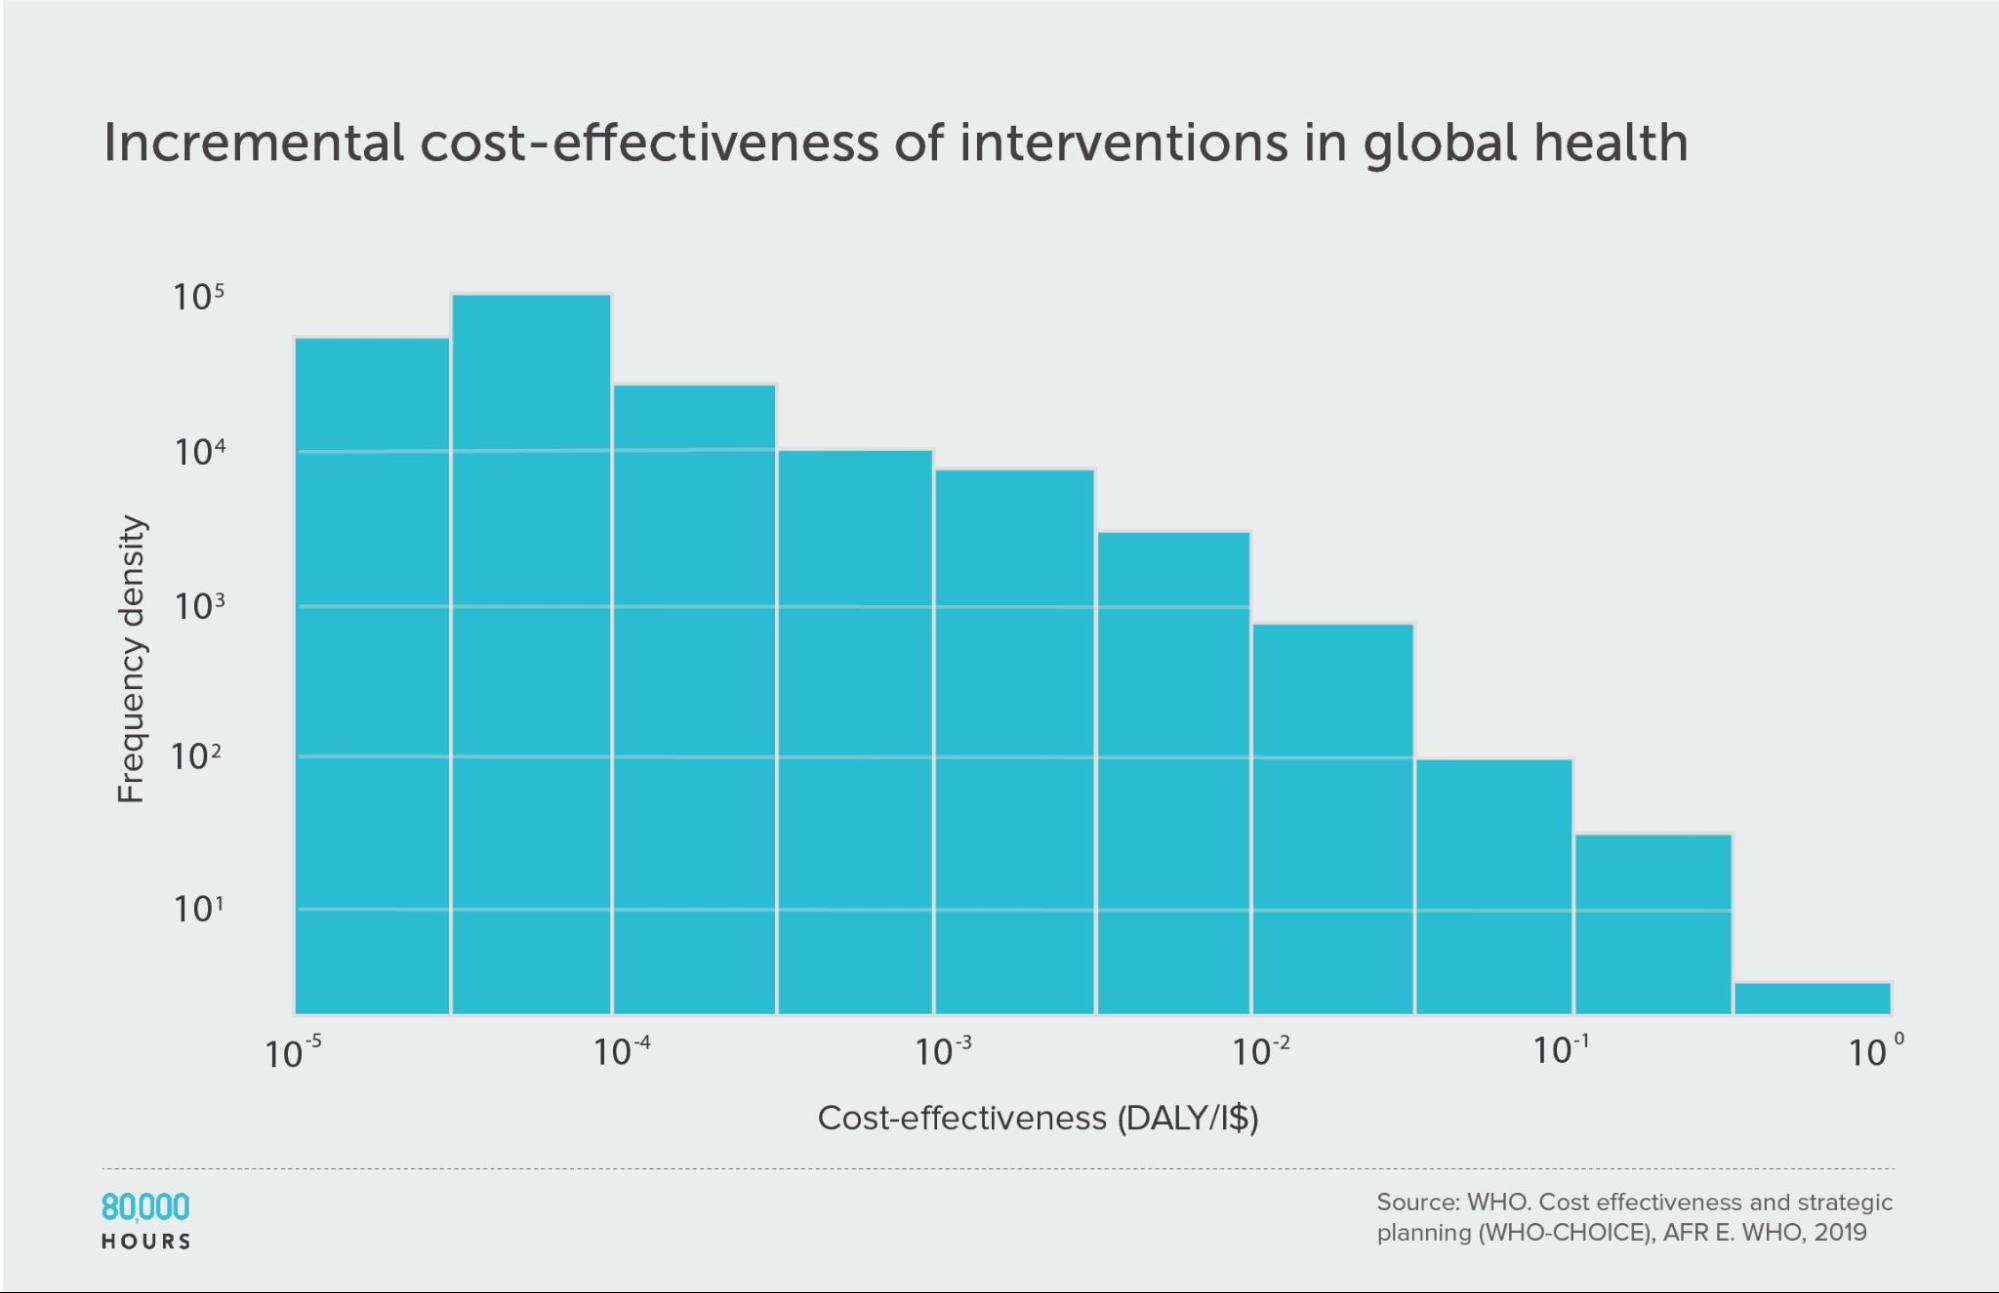 Logarithmic binned histogram of the incremental cost effectiveness of health interventions in developing countries in terms of how many years of illness they prevent, according to data from WHO-CHOICE 2019